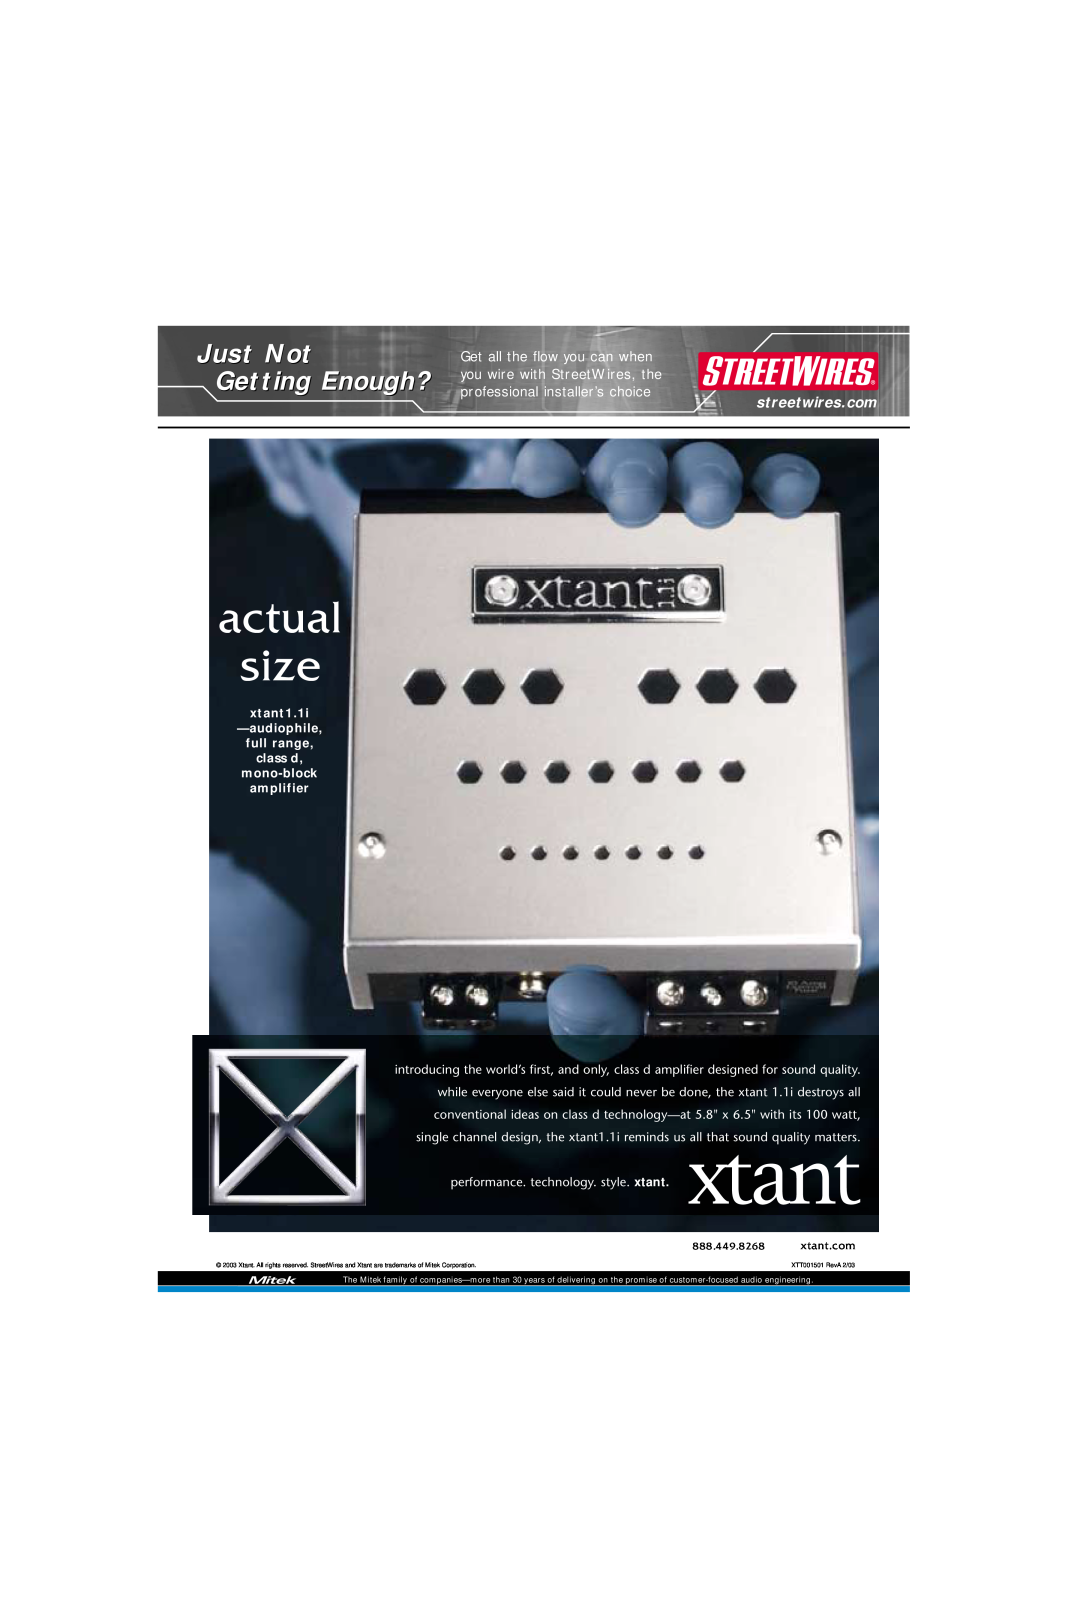 Xtant 1.1I manual actual size, Just Not Getting Enough?, xtant1.1i -audiophile full range class d, mono-block amplifier 